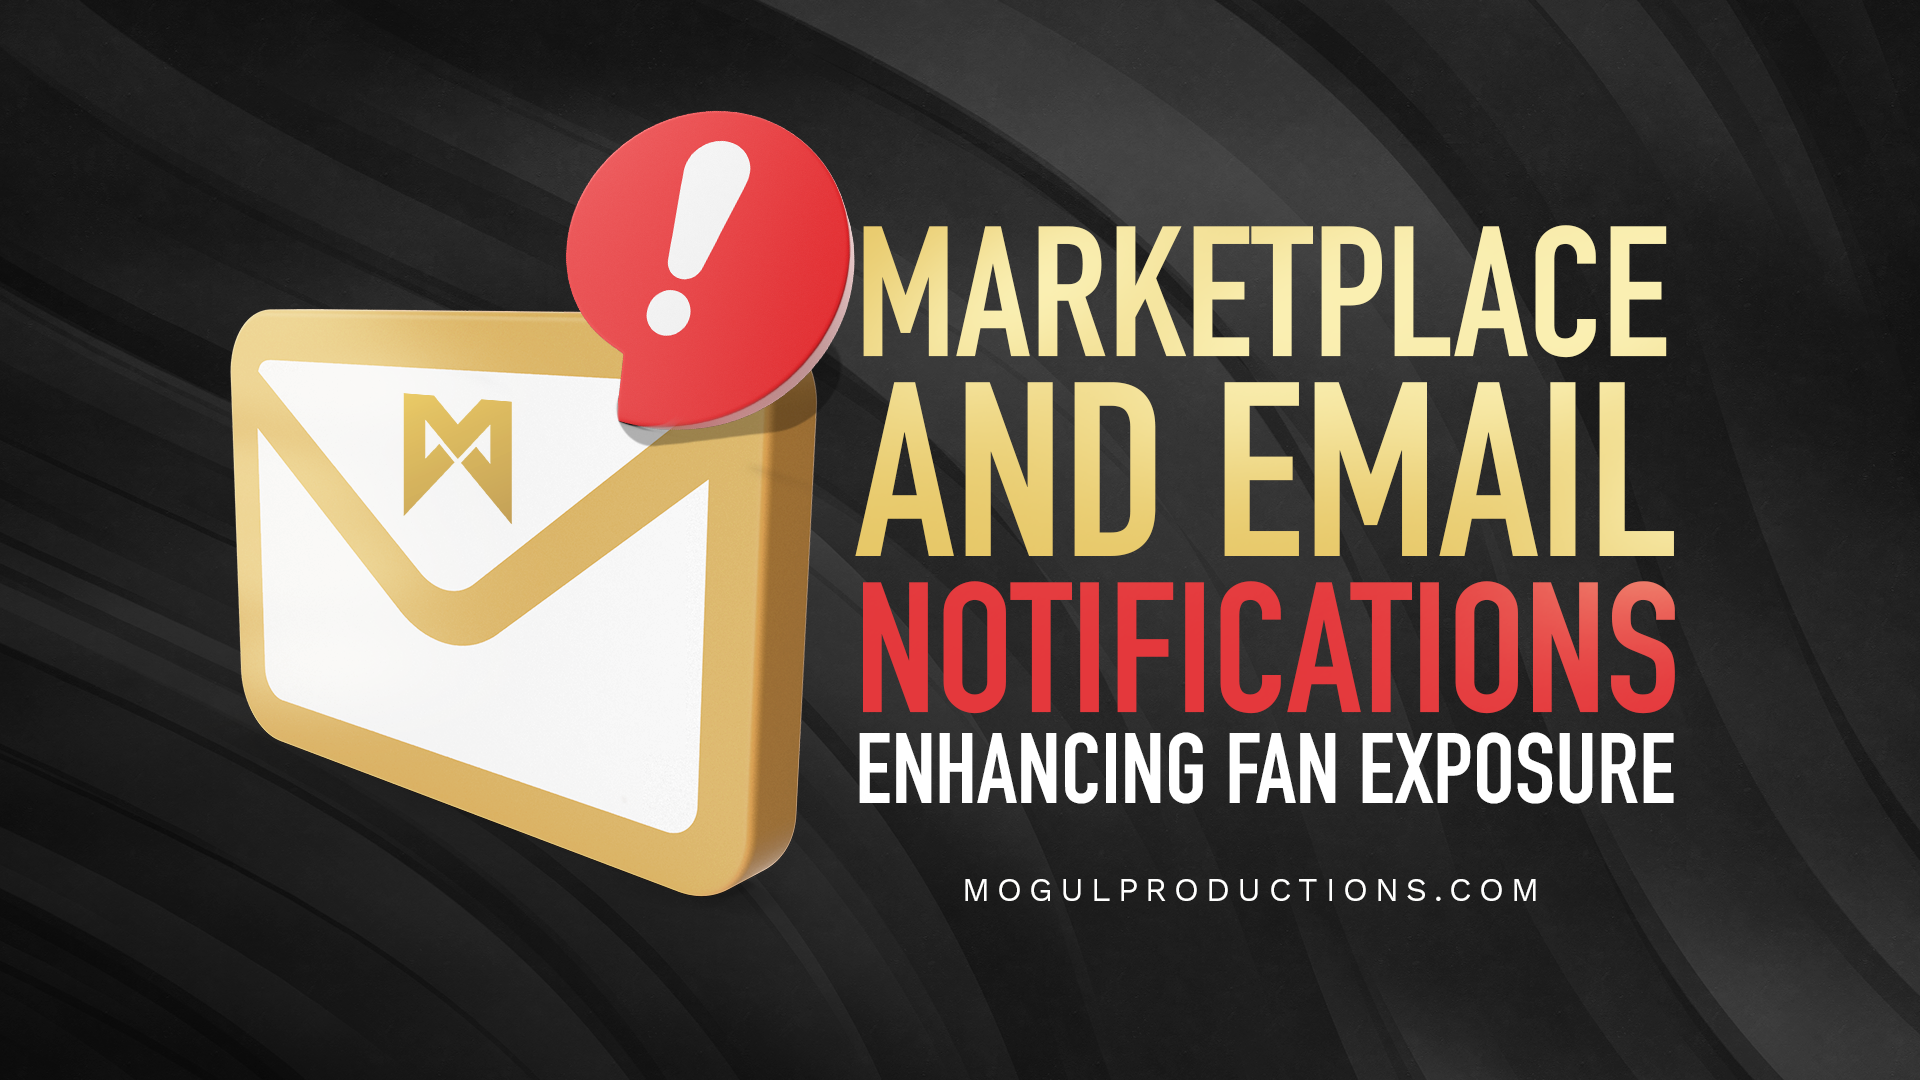 Mogul Productions - Marketplace and Email Notifications, Enhancing Fan Exposure